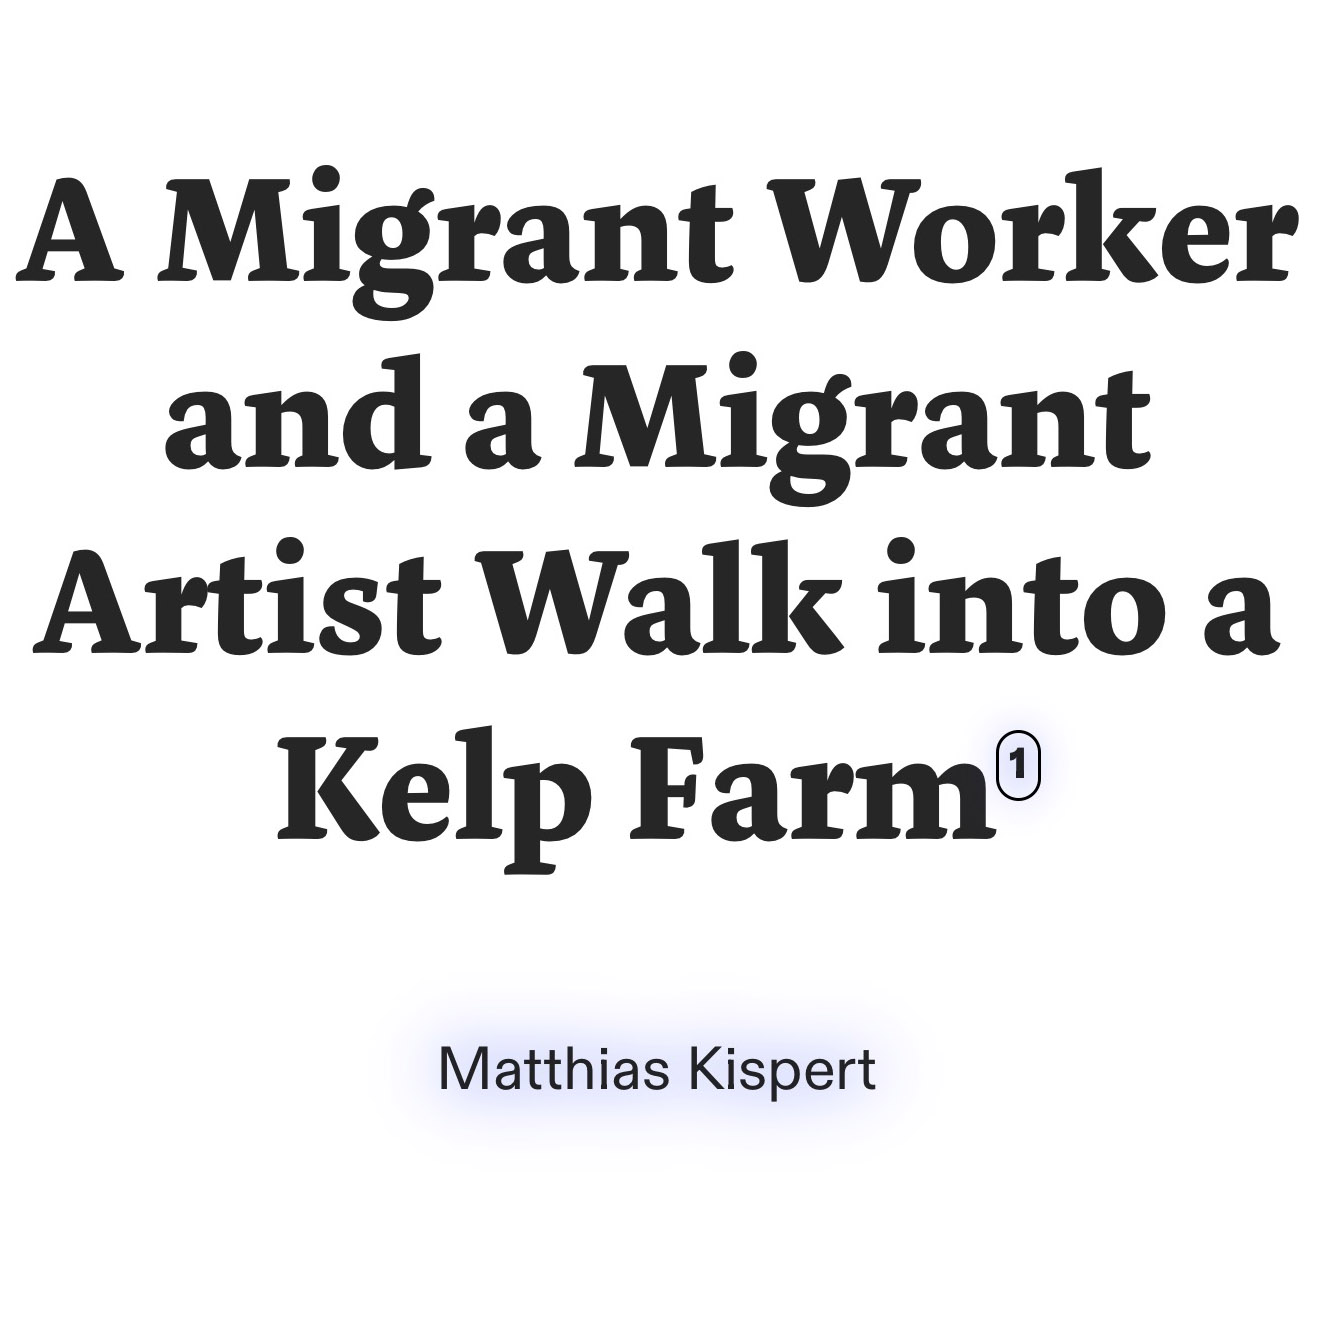 text poster reading 'A Migrant Worker and a Migrant Artist Walk into a Kelp Farm' by Matthias Kispert